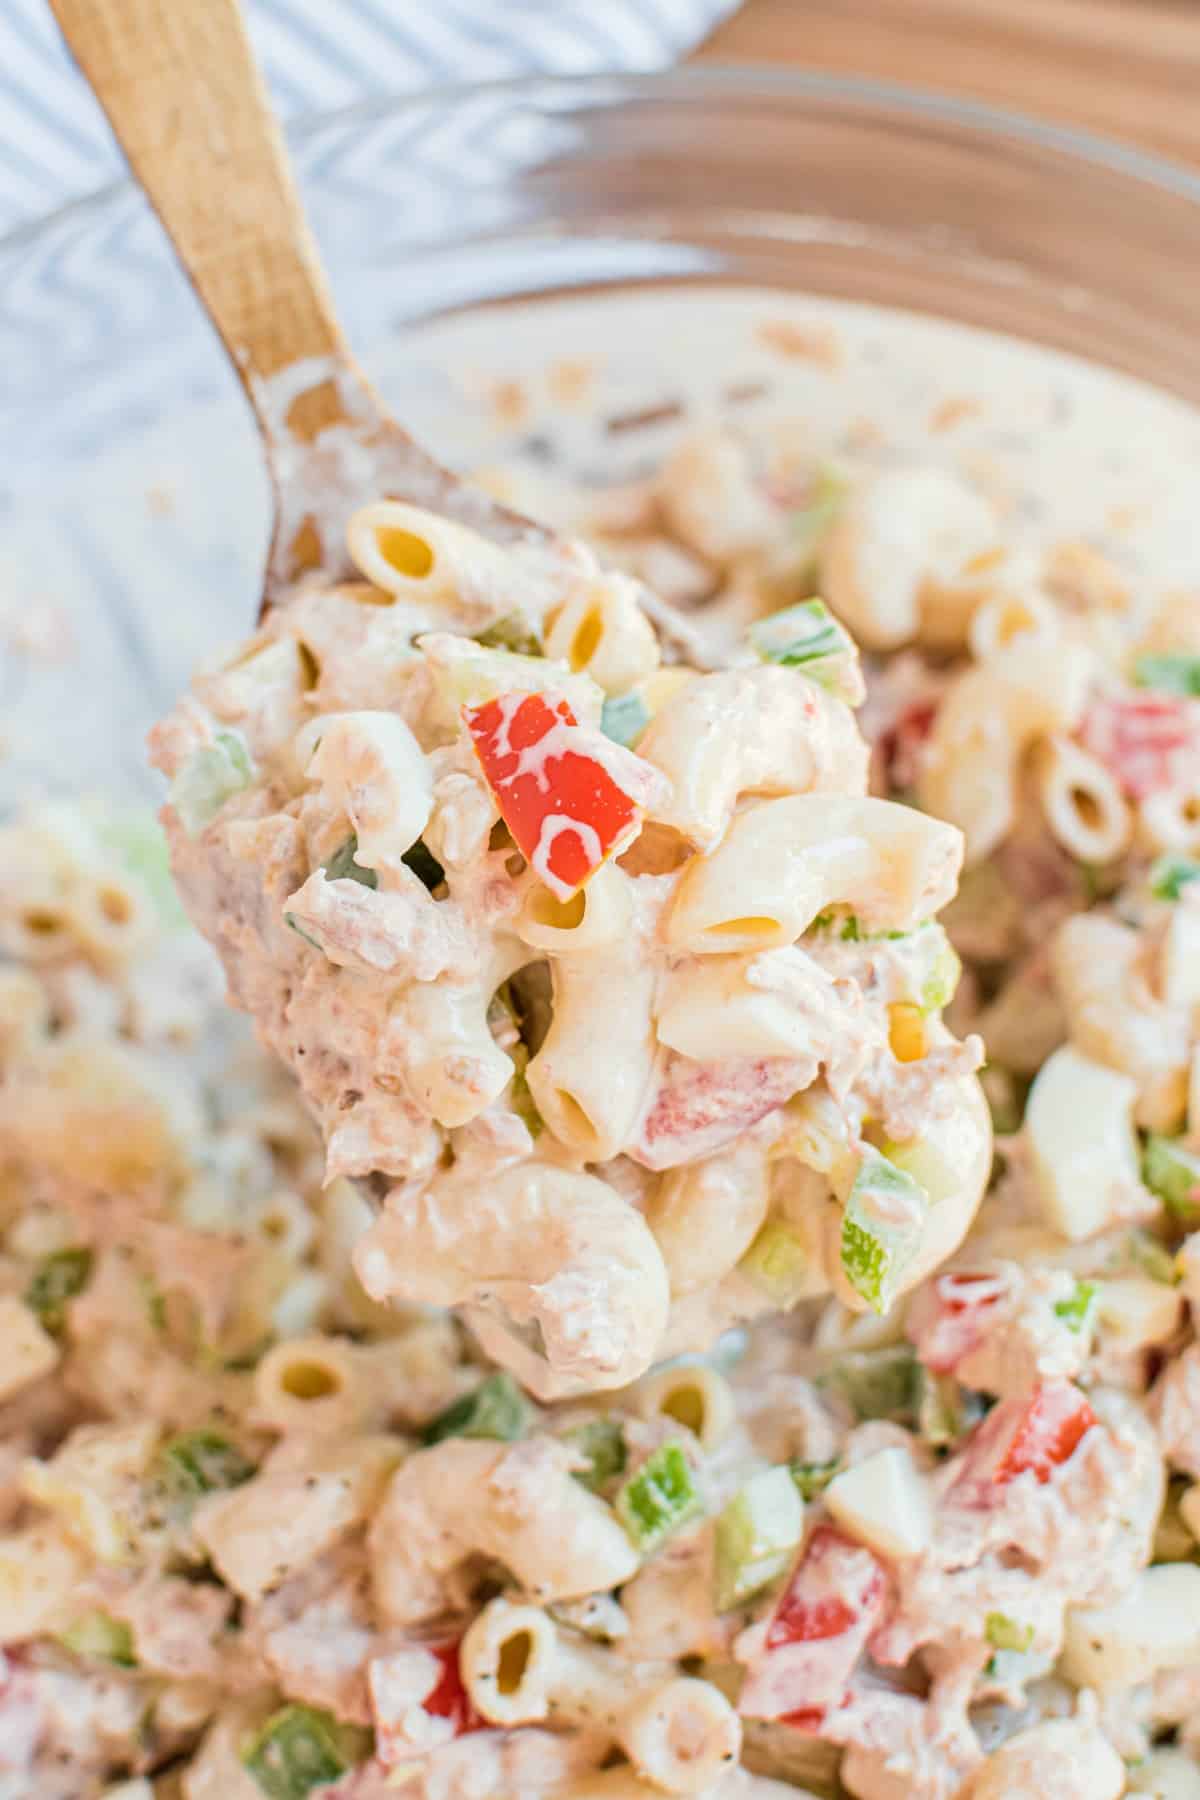 Macaroni salad scooped on a wooden spoon.